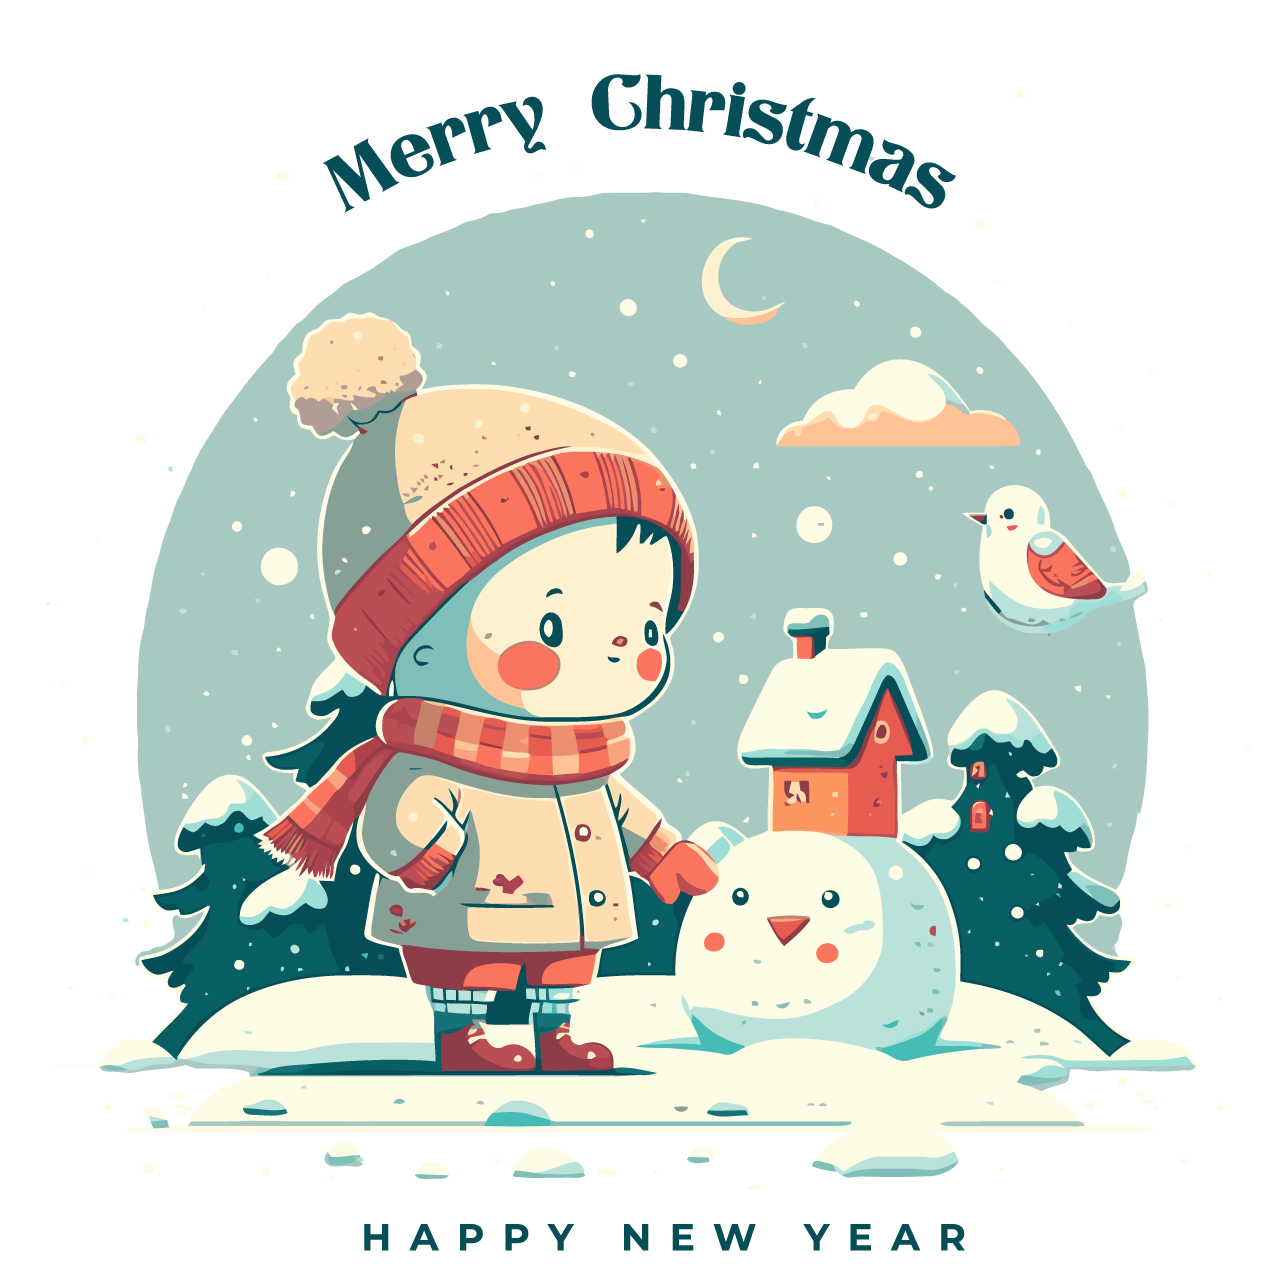 Merry christmas happy new year greeting card